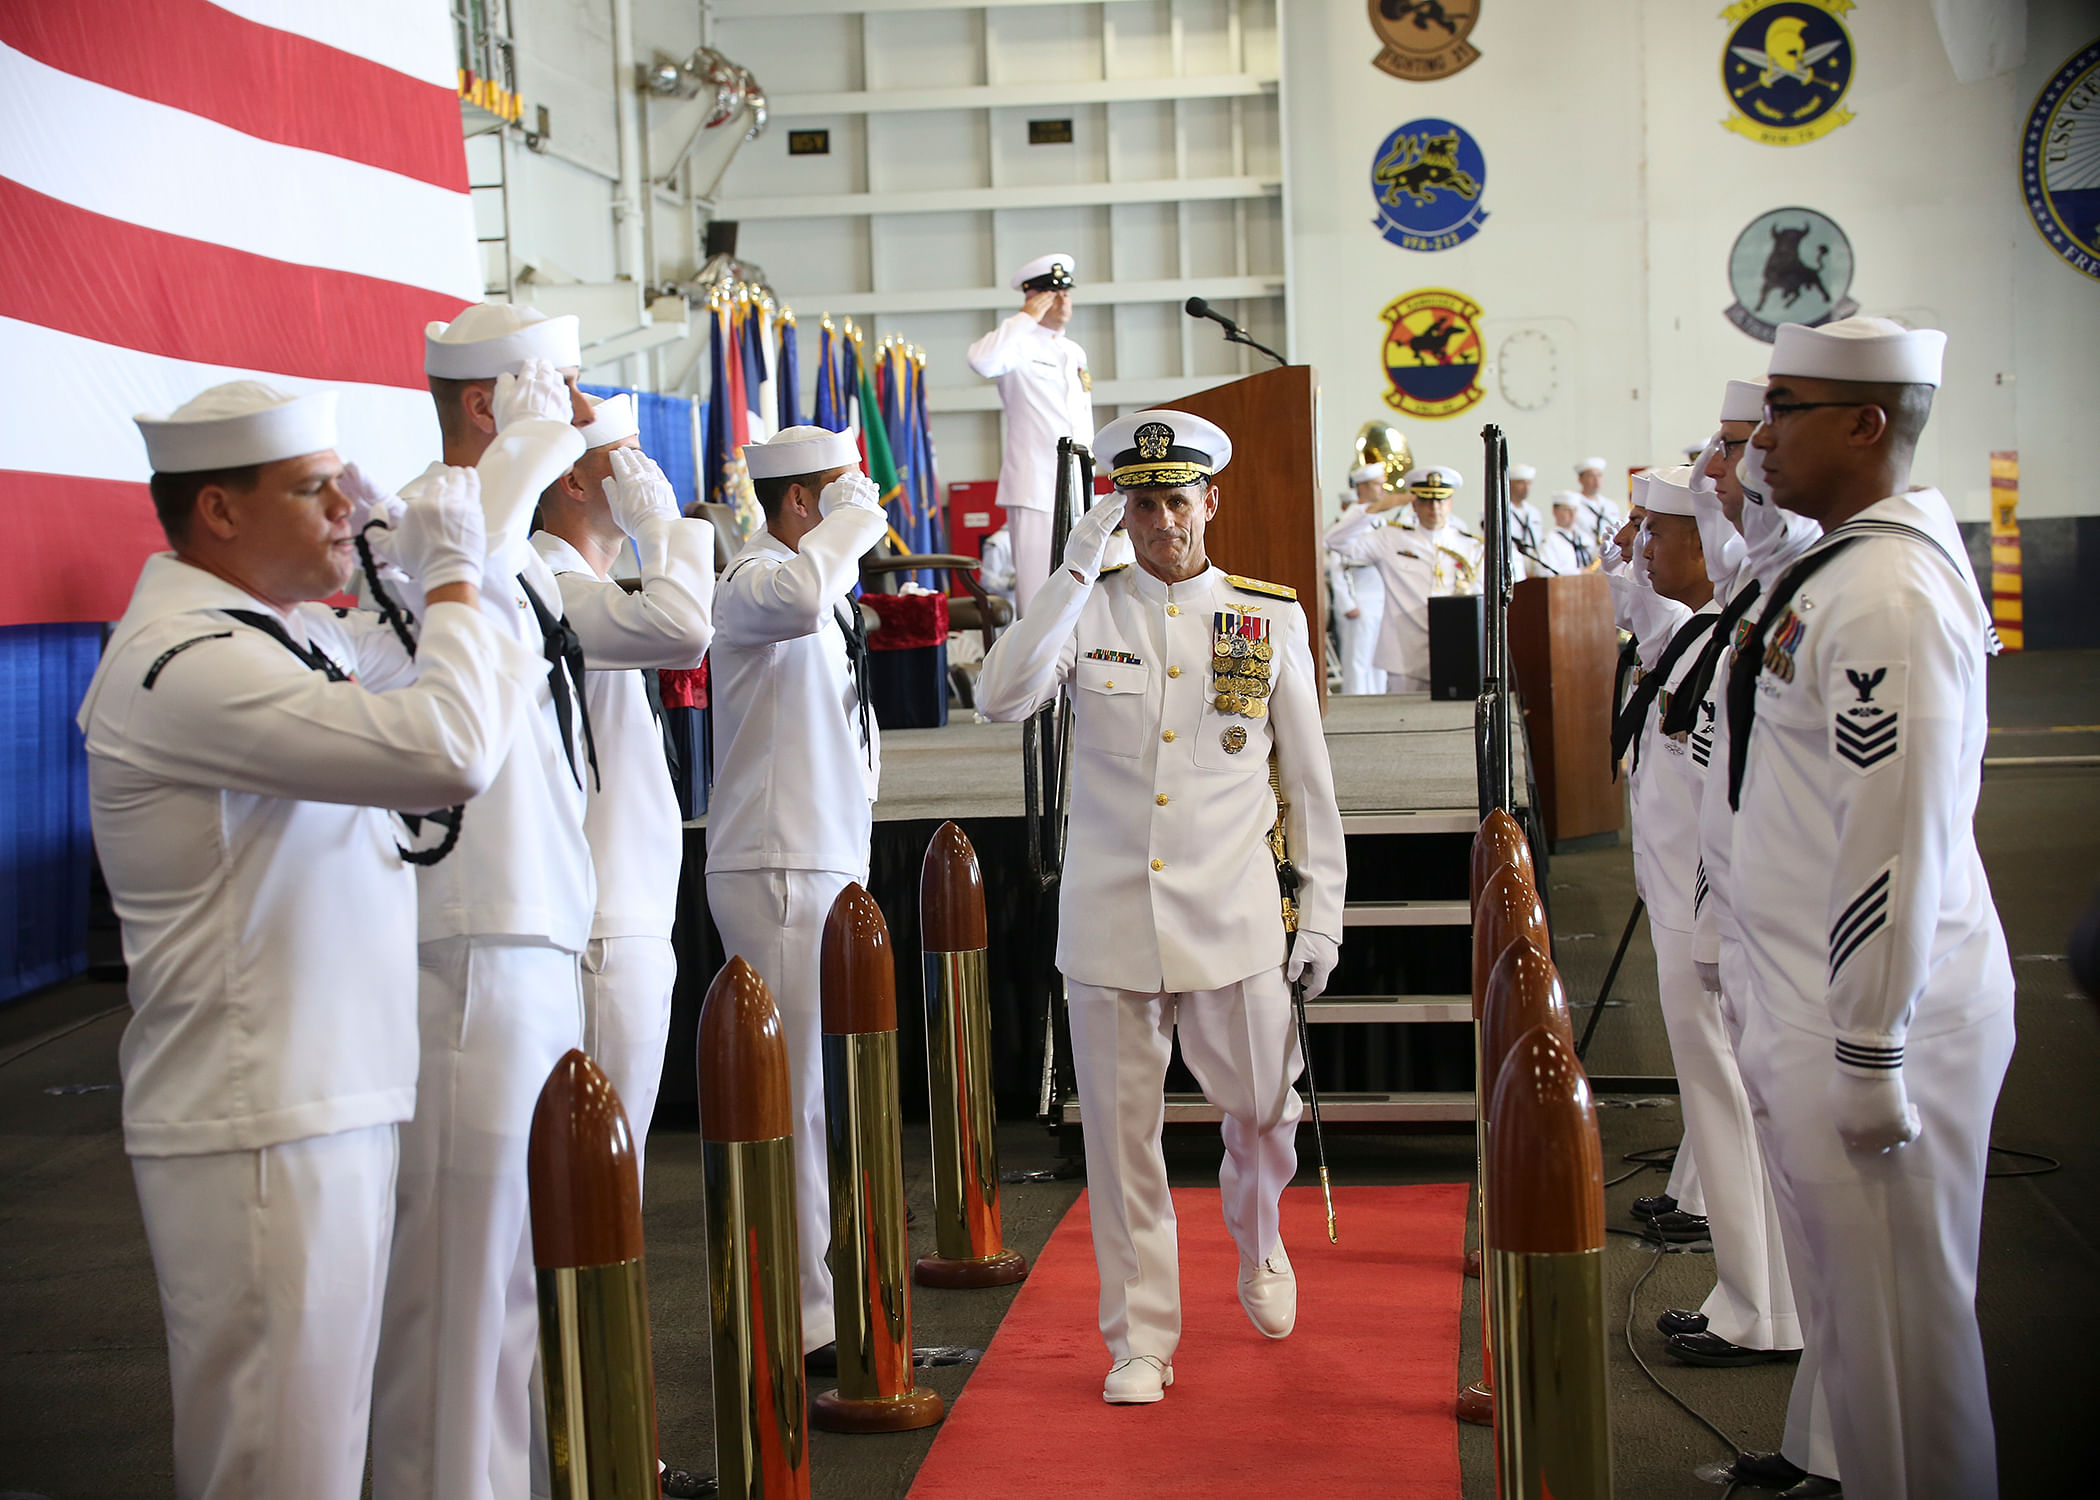 US Vice Adm Andrew "Woody" Lewis takes part in ceremonial opening of the US Navy 2nd Fleet aboard the nuclear aircraft carrier USS George H W Bush (CVN 77) on August 24, 2018. US Navy